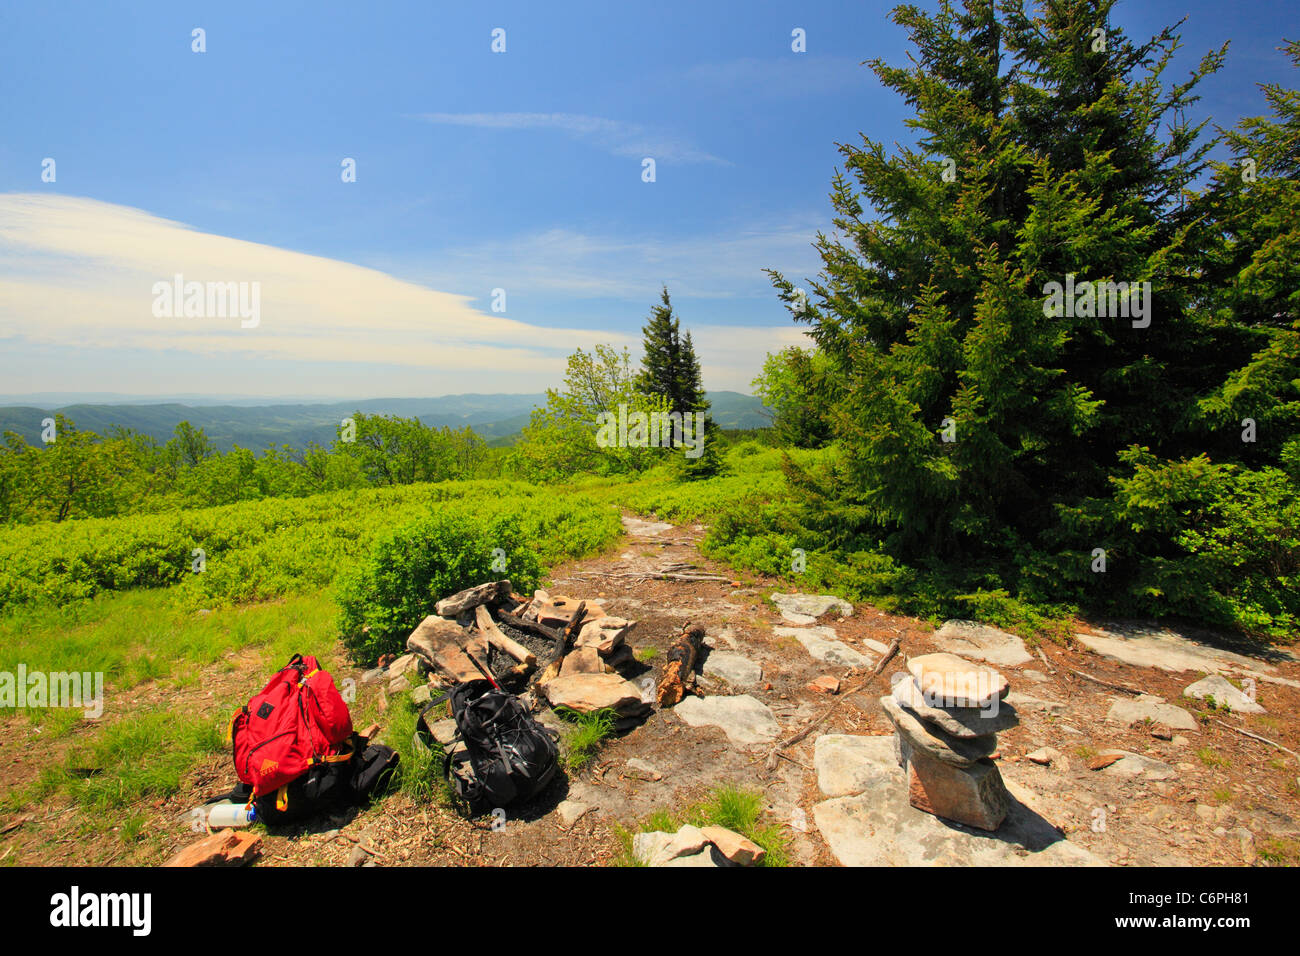 Camp Site, Hidden PassageTrail, Flat Rock and Roaring Plains, Dolly Sods, Dry Creek, West Virginia, USA Stock Photo